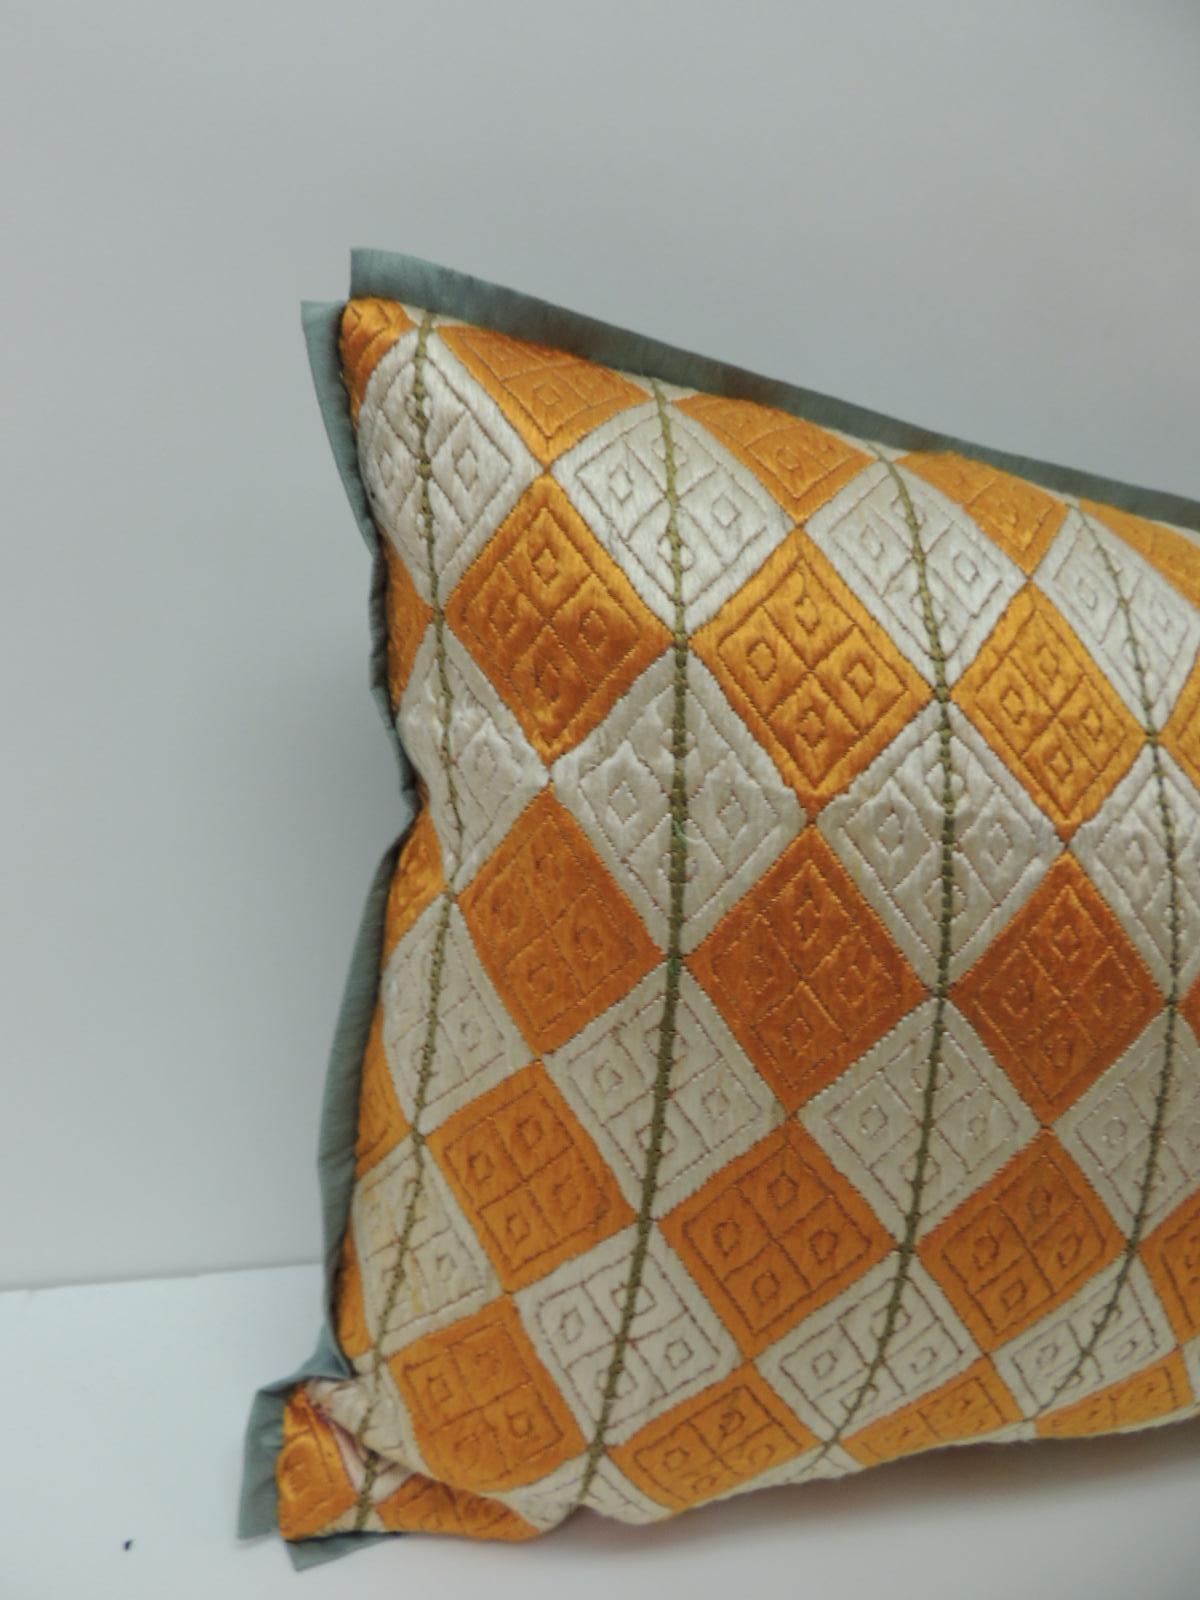 Throw pillow handcrafted with an artisanal Indian Phulkari textile exhibiting a yellow and ecru diamond patterns motif. The Phulkari artisanal antique textile was handmade with embroidered silk floss threads stitched onto linen. Throw pillow further